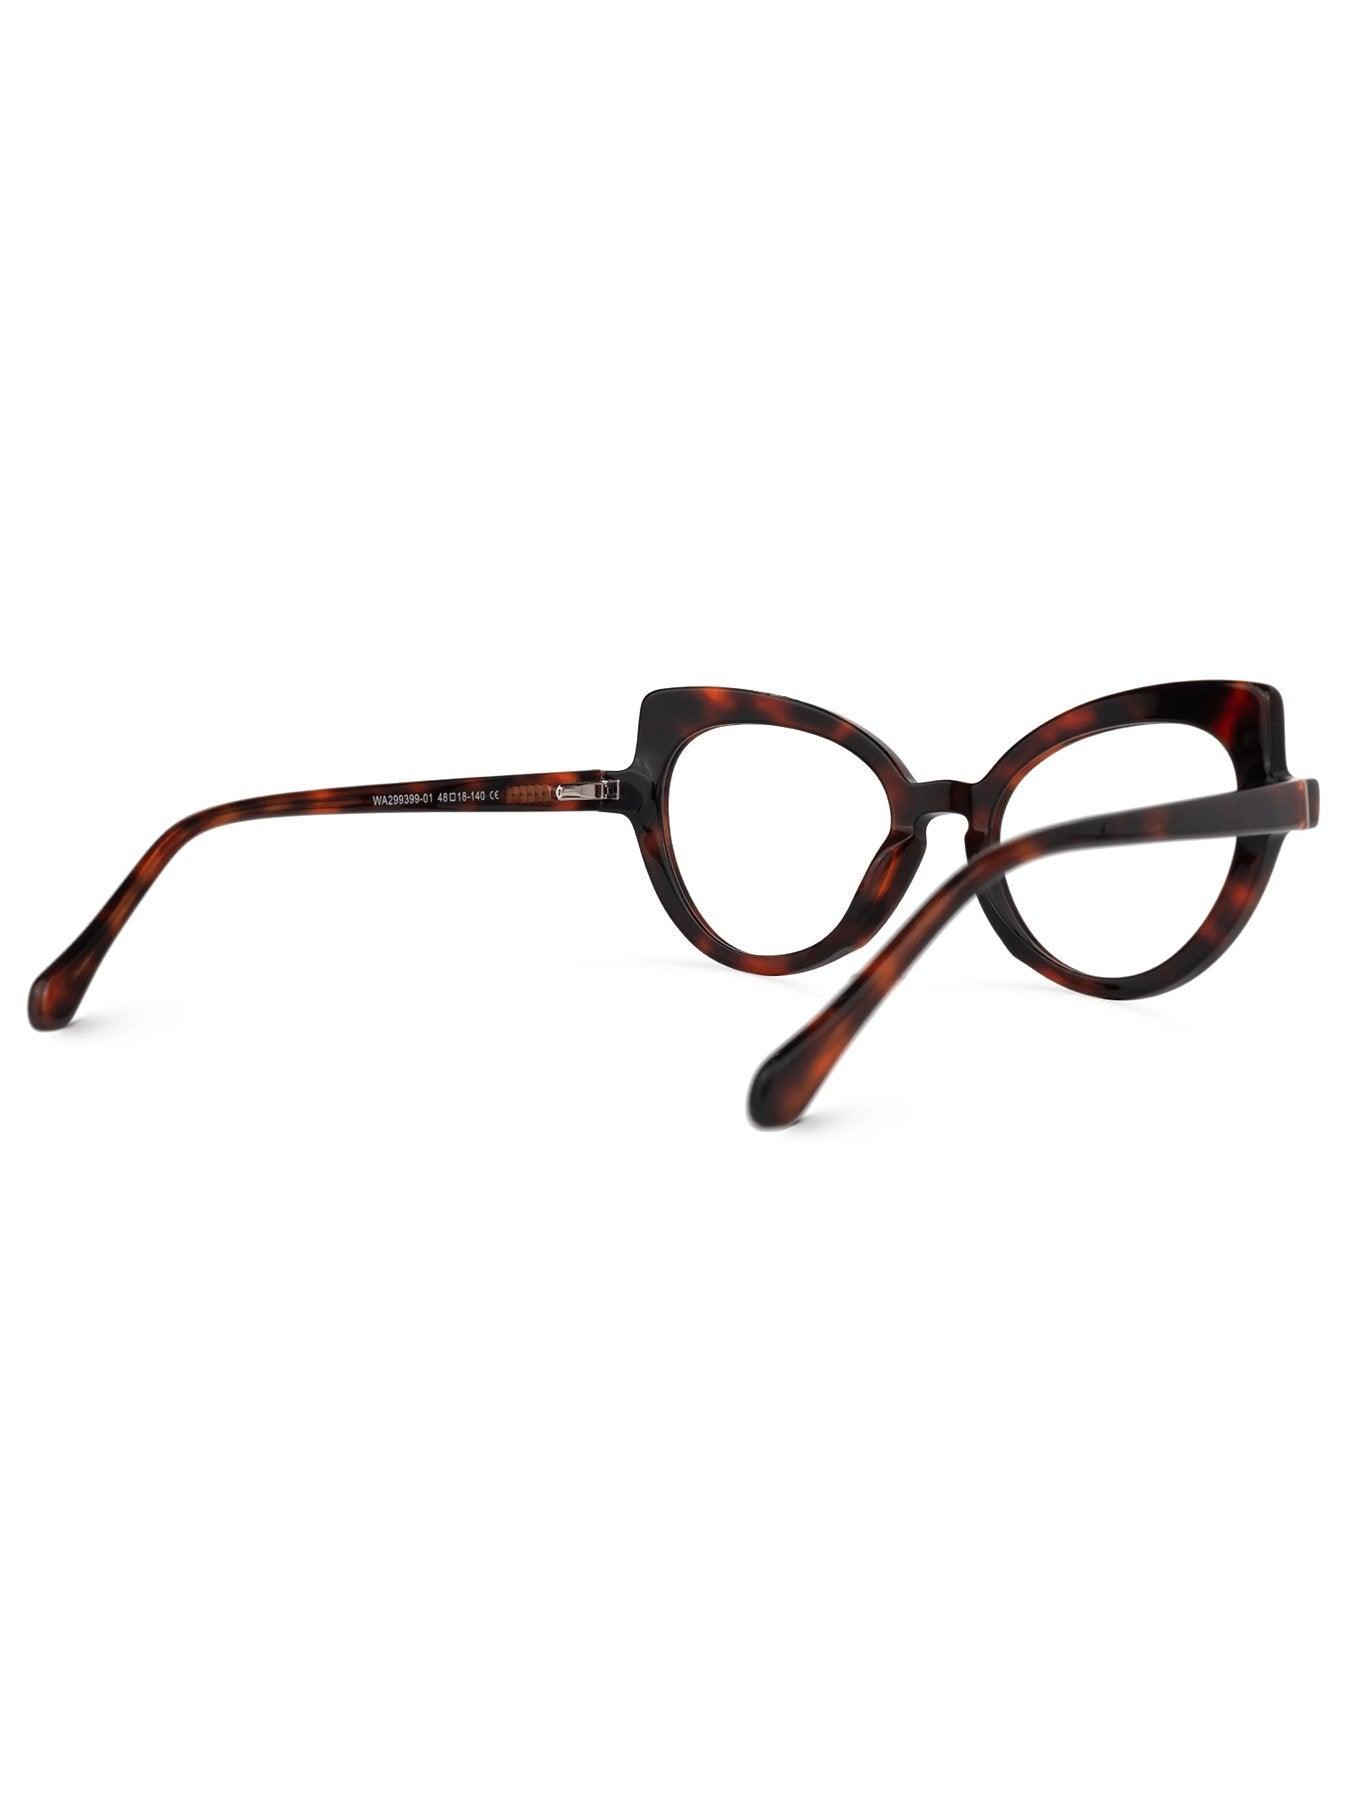 Cat Eye Acetate Frames Never Go Out Of Style